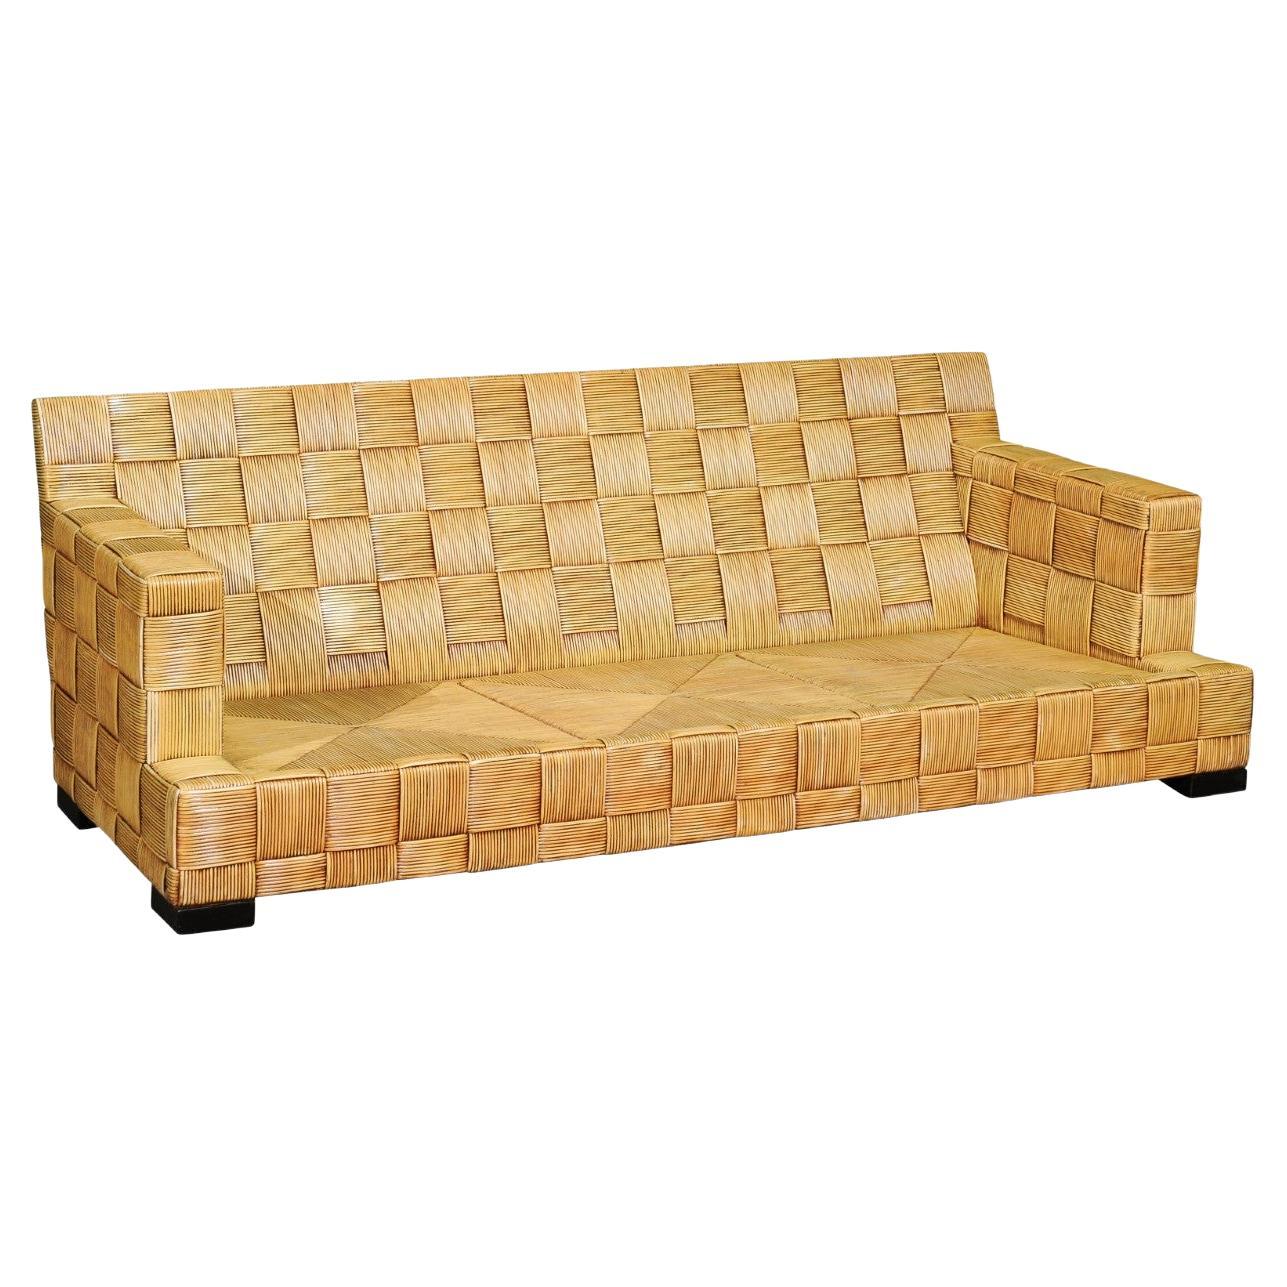 Stellar Block Island Collection Cane Sofa by Hutton for Donghia - Pair Available